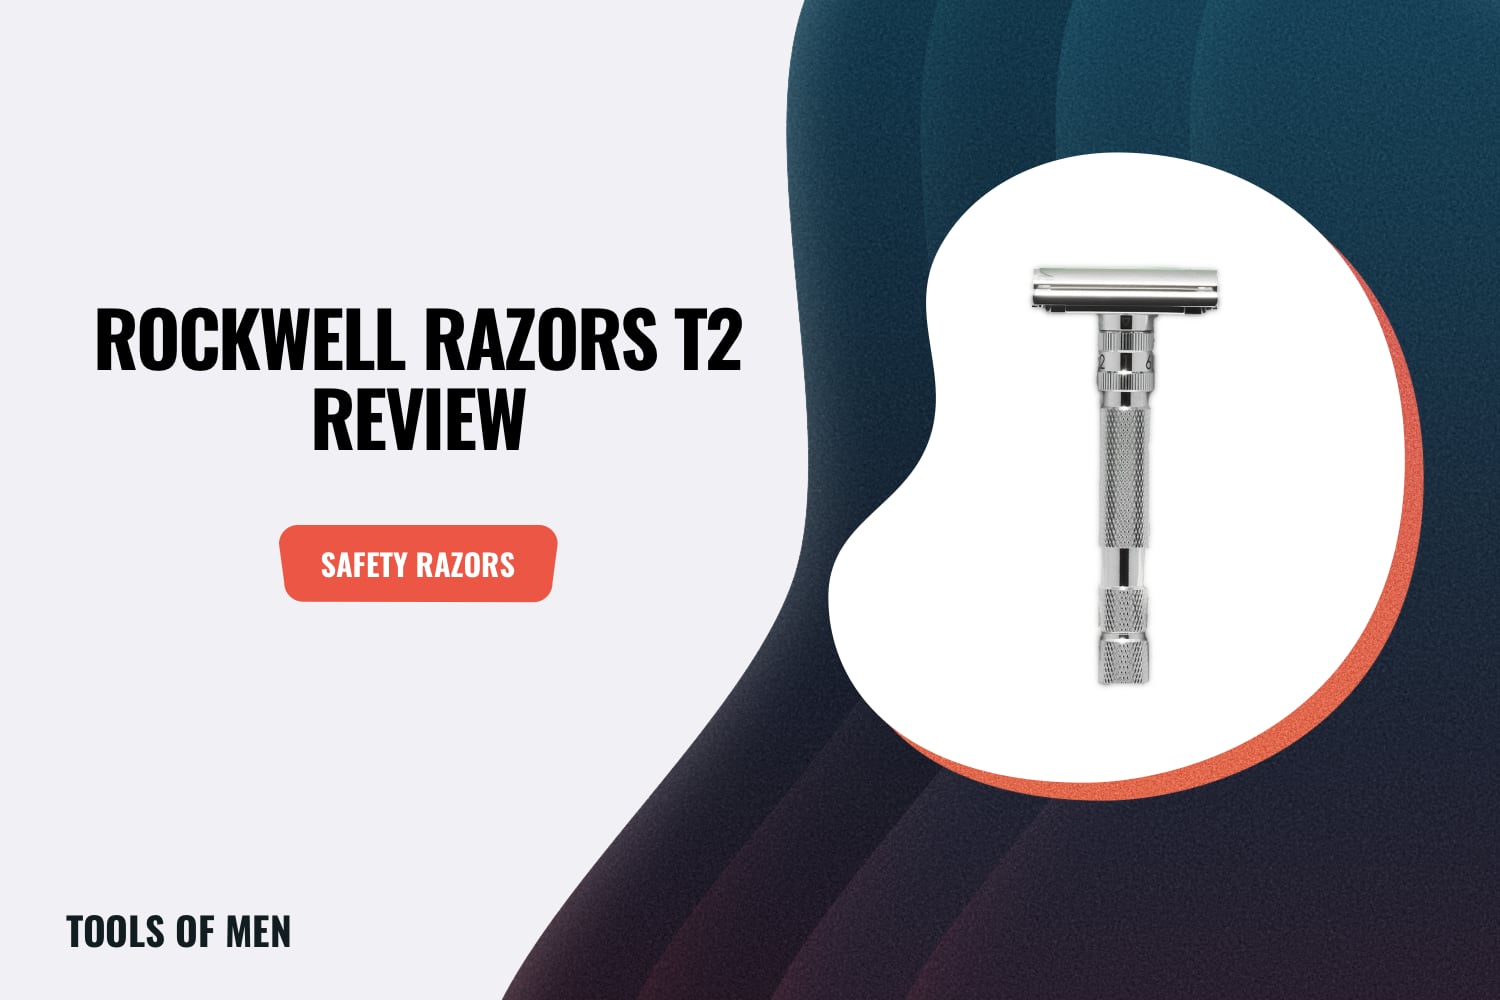 Rockwell Razors t2 Review feature image